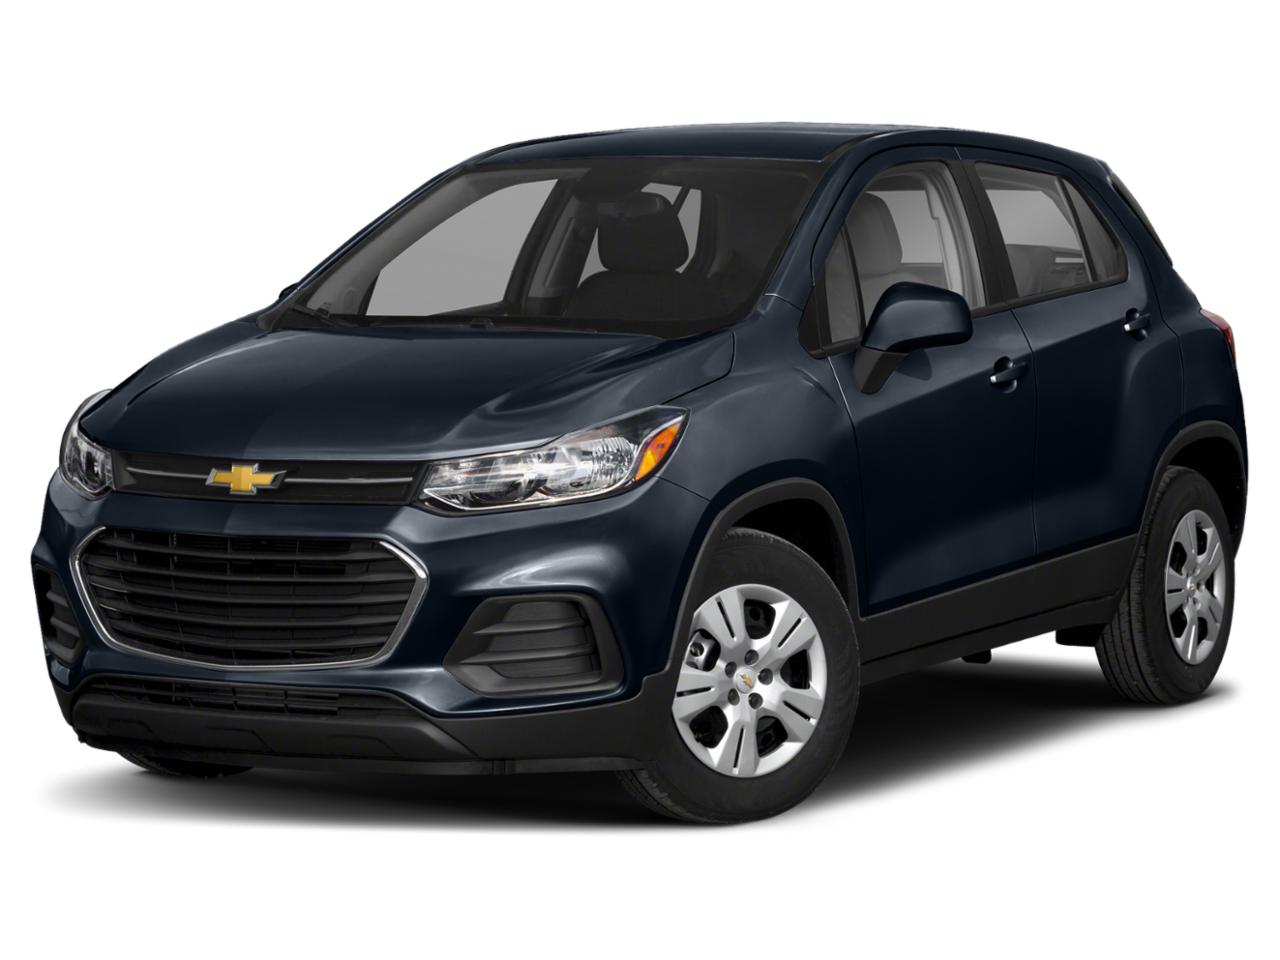 2018 chevy trax problems